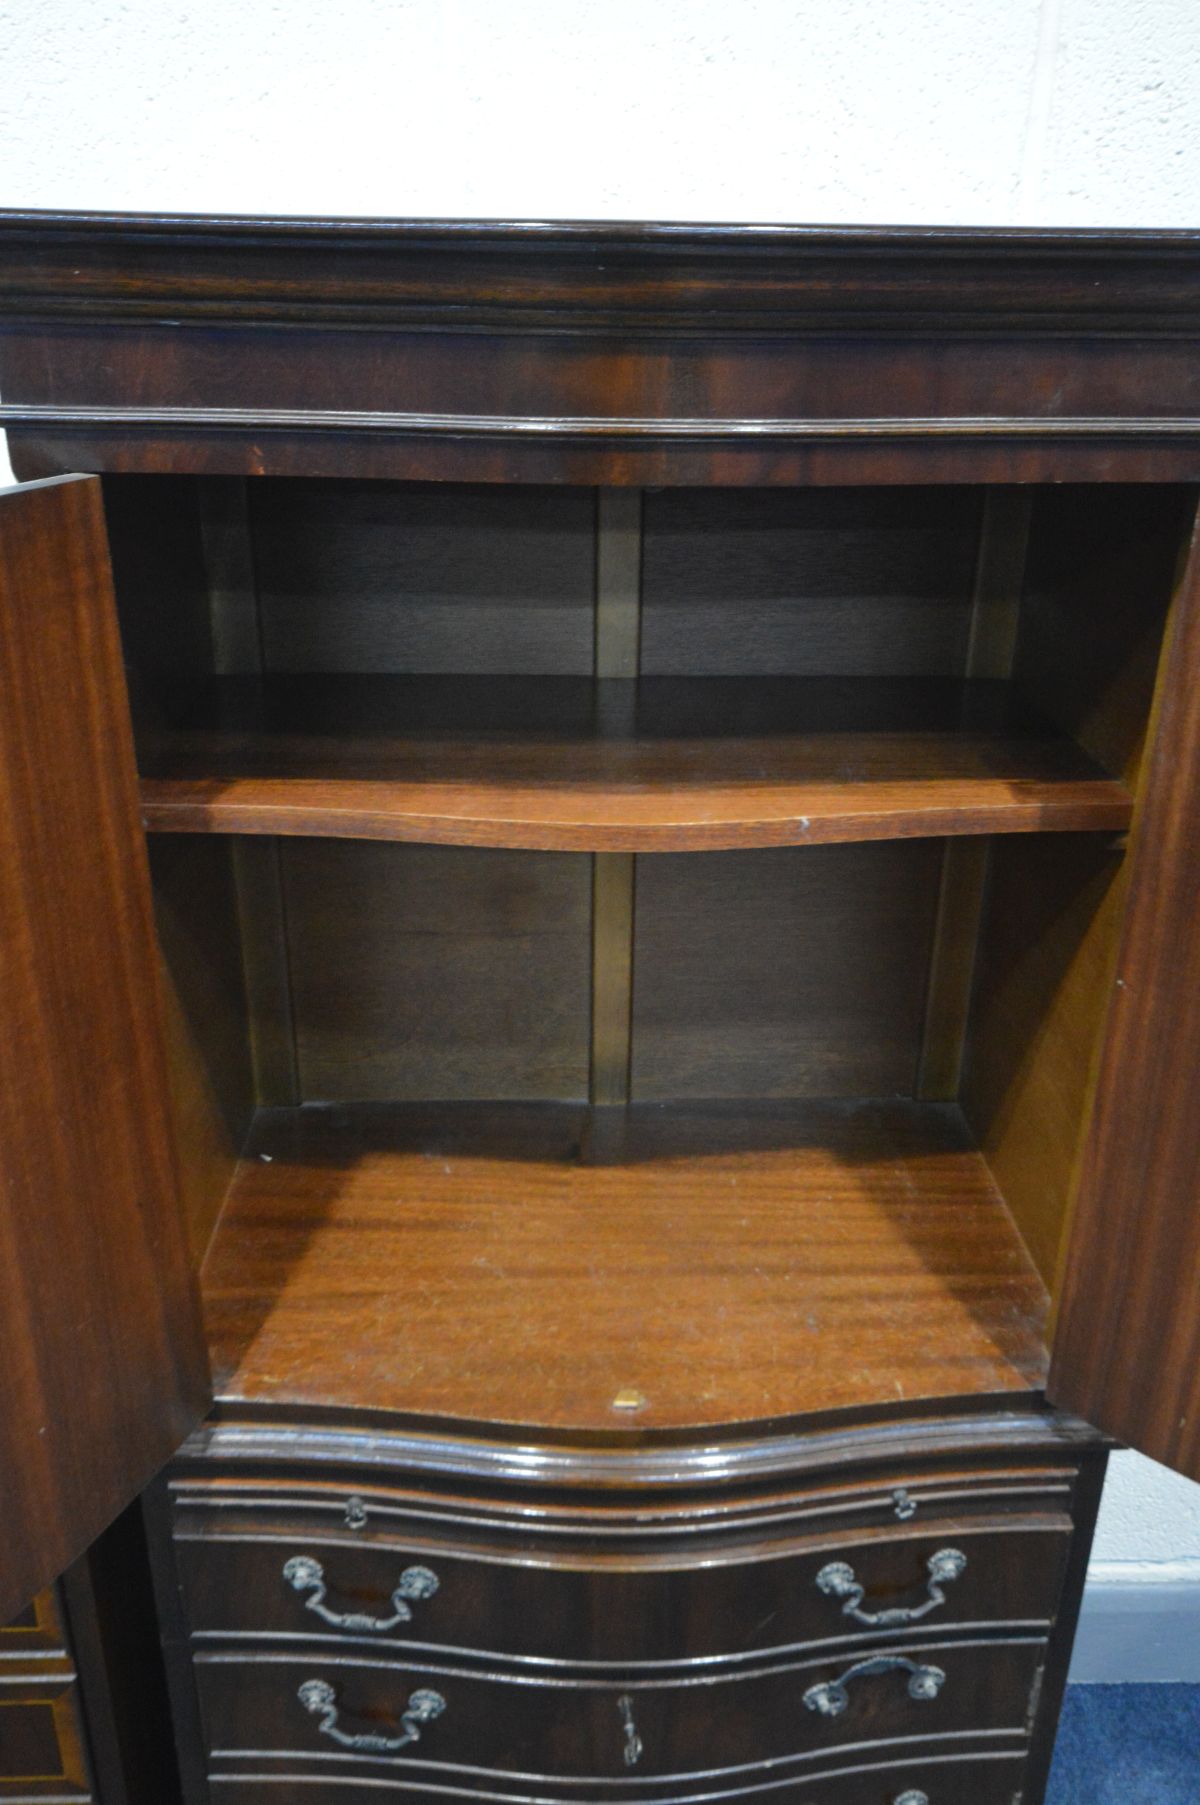 A MAHOGANY SIDEBOARD with three drawers above four cupboard doors, together with a mahogany hi-fi - Image 4 of 4